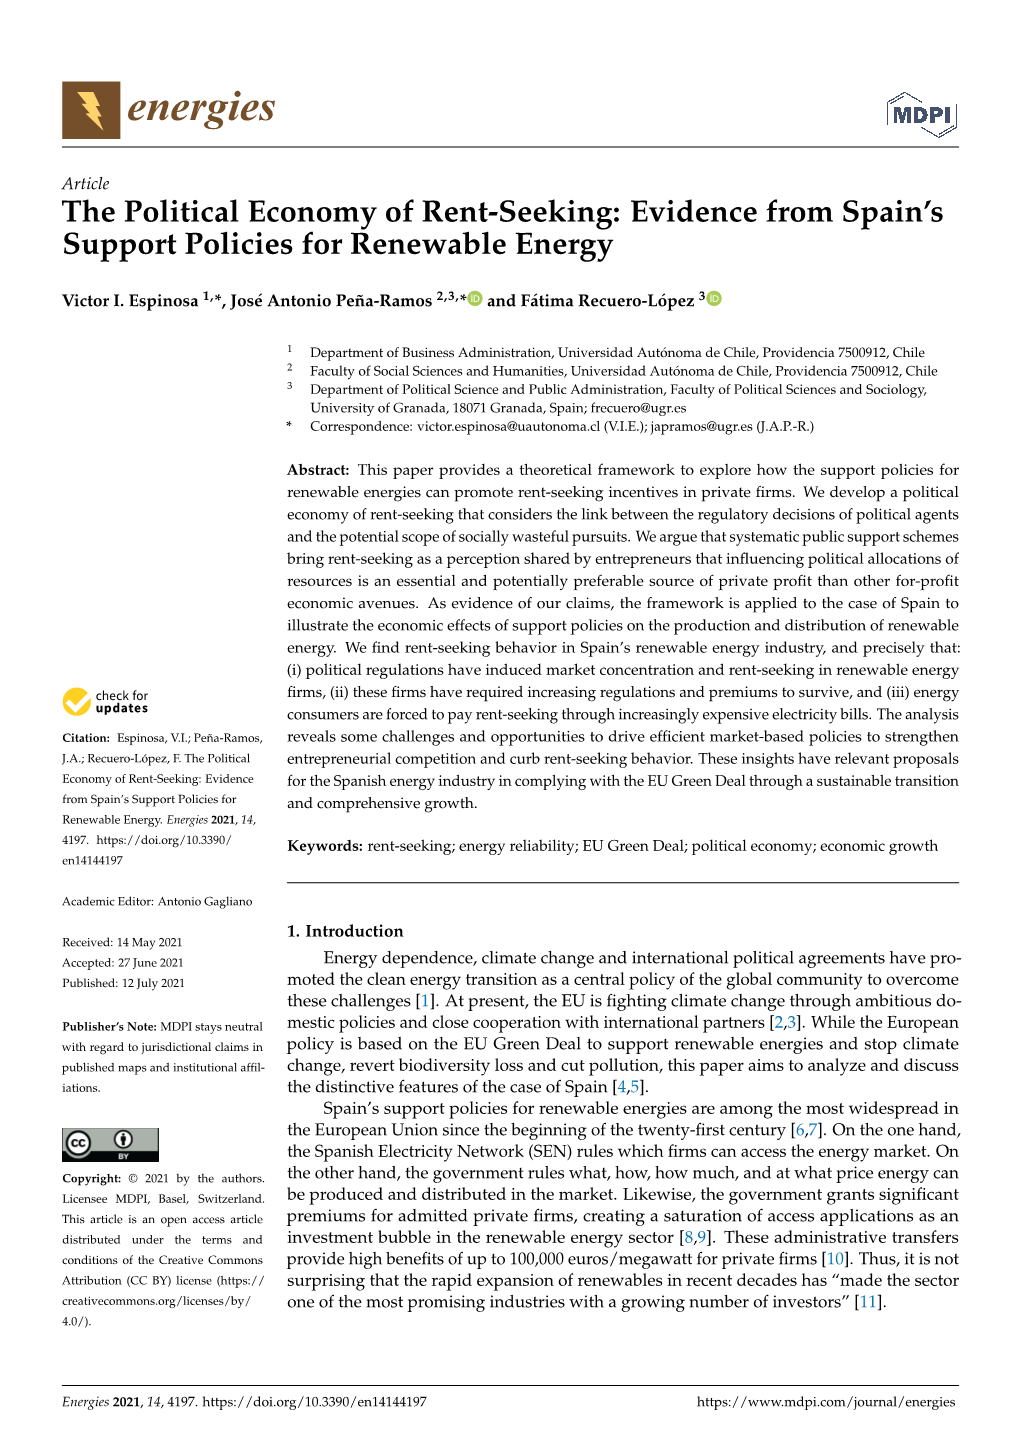 The Political Economy of Rent-Seeking: Evidence from Spain's Support Policies for Renewable Energy